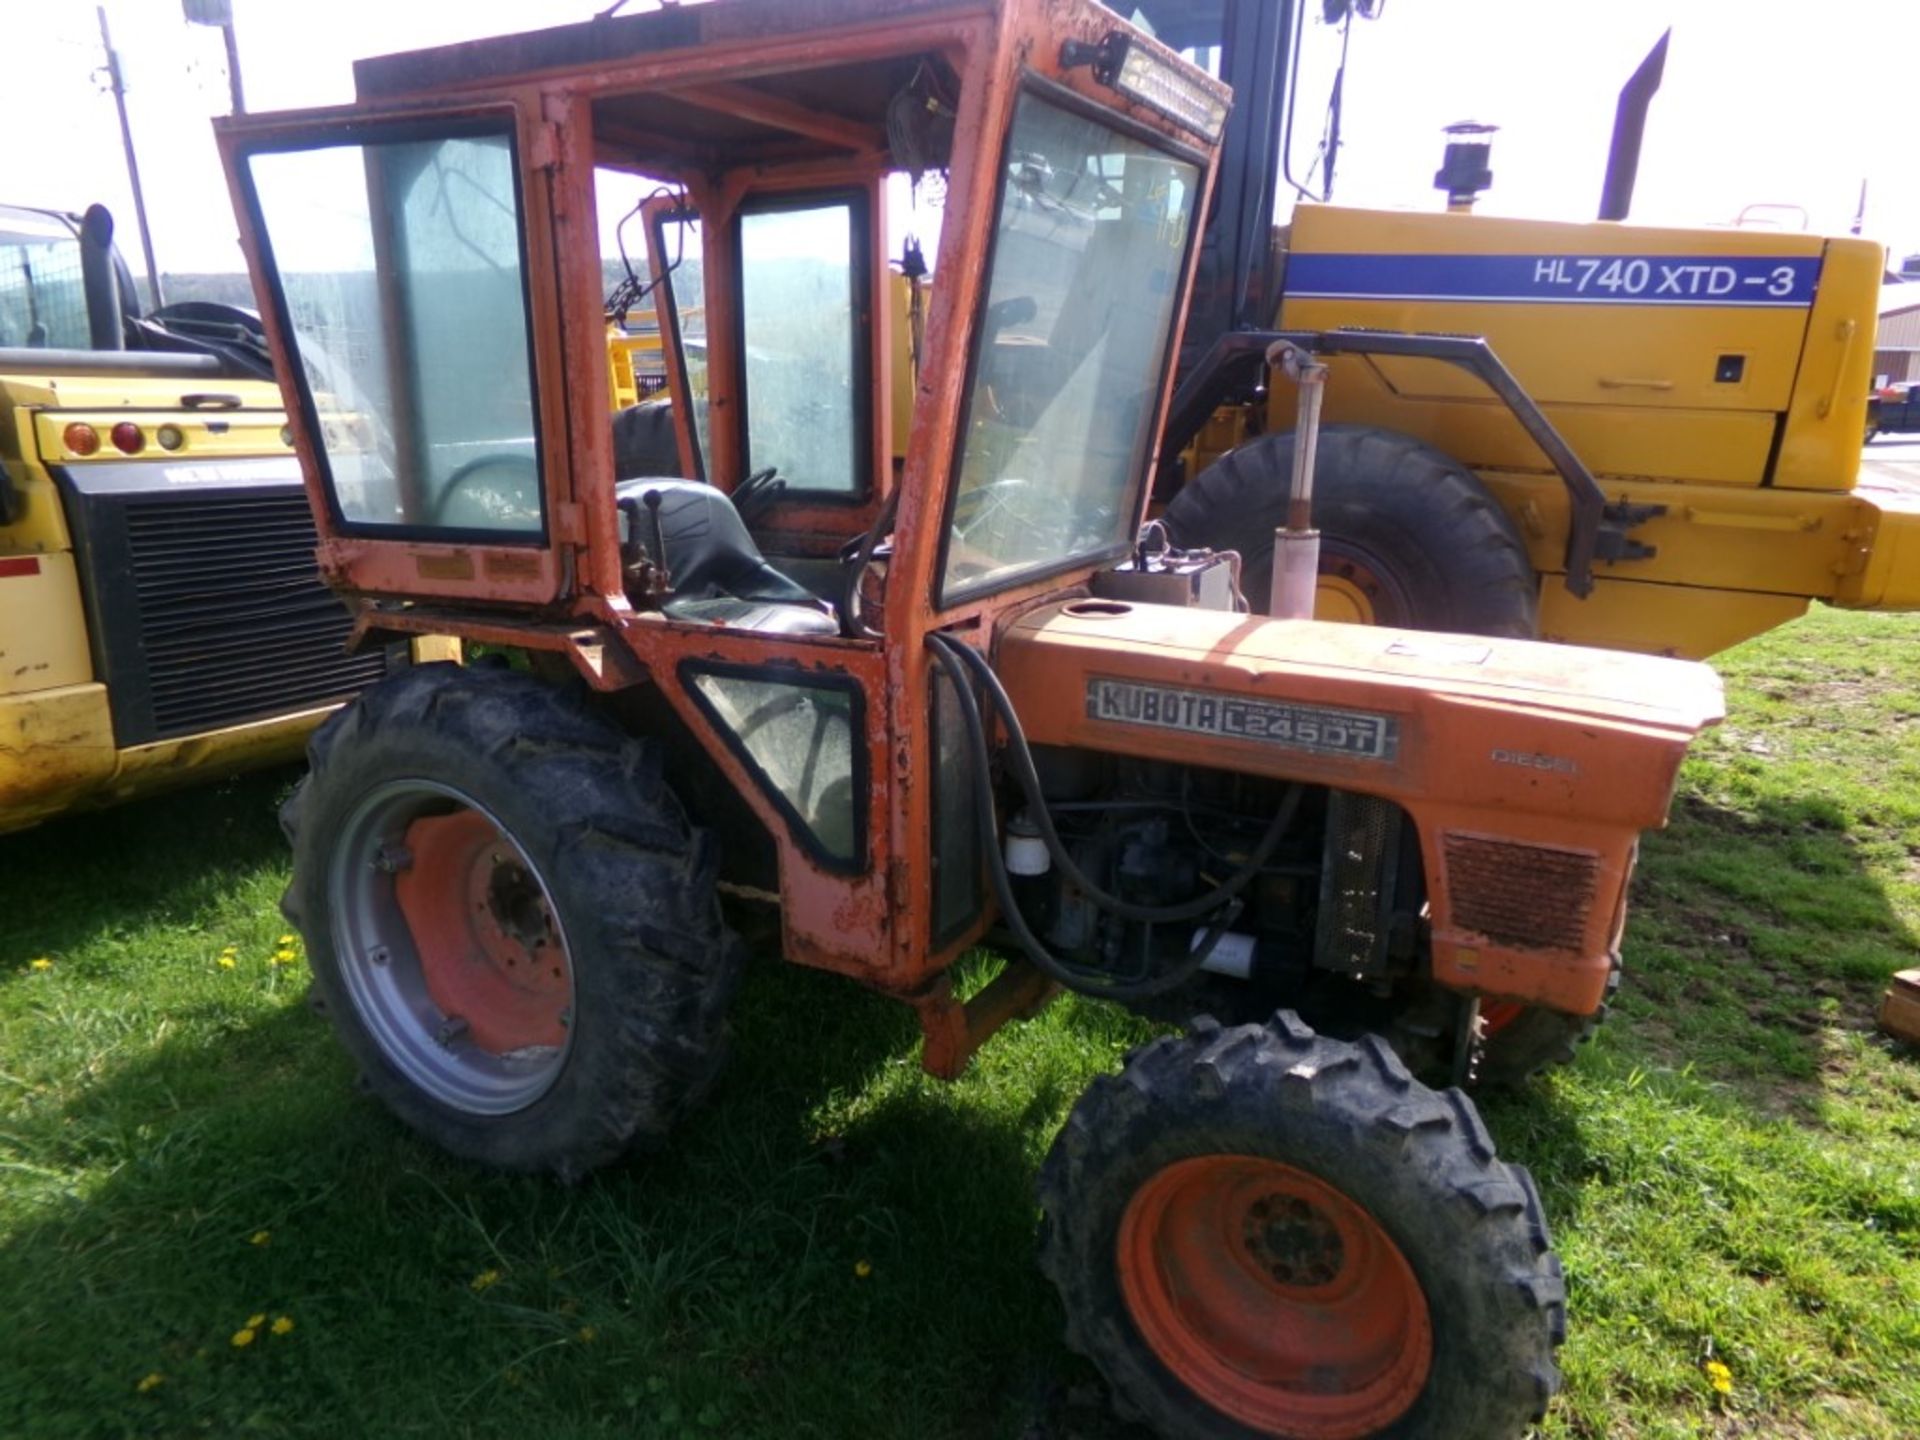 Kubota L245DT 4 WD Compact Tractor with Cab, PTO, 3 PT Hitch, Single Rear Hydraulics, Runs Fine - Image 2 of 2